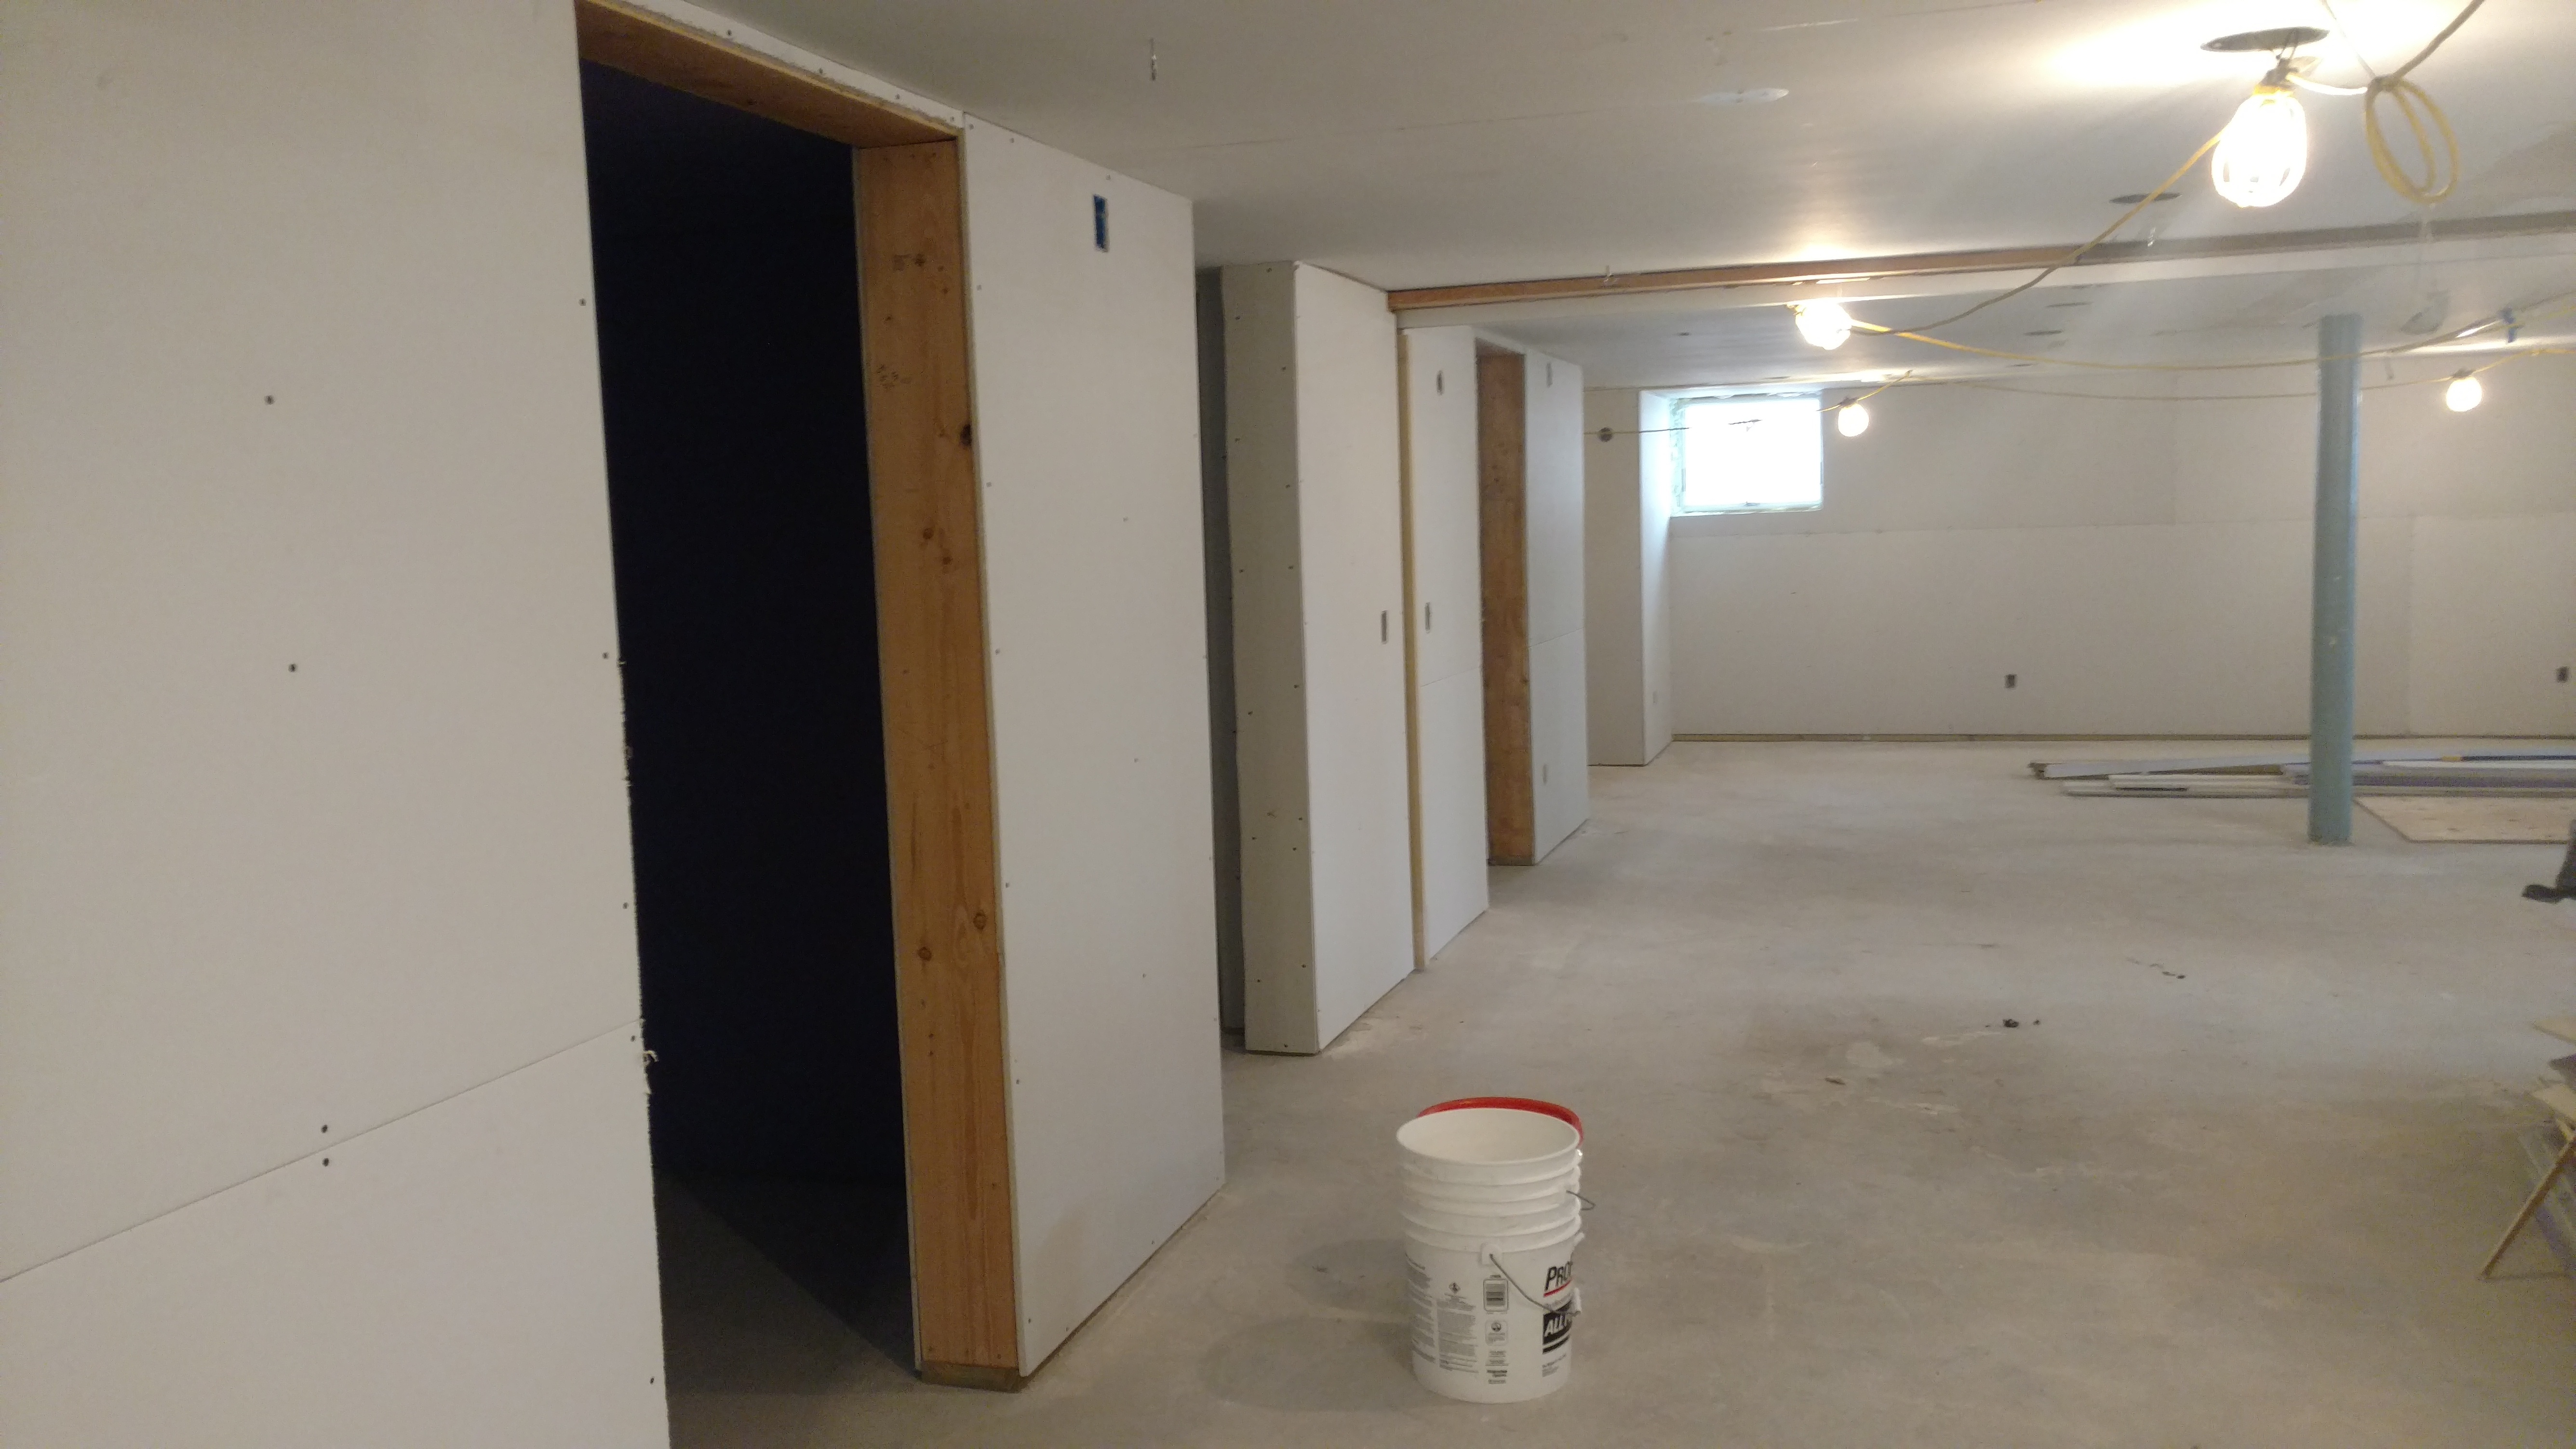 February 9_2019_Dry_wall_showing_2_bathroom_doorways_and_entry